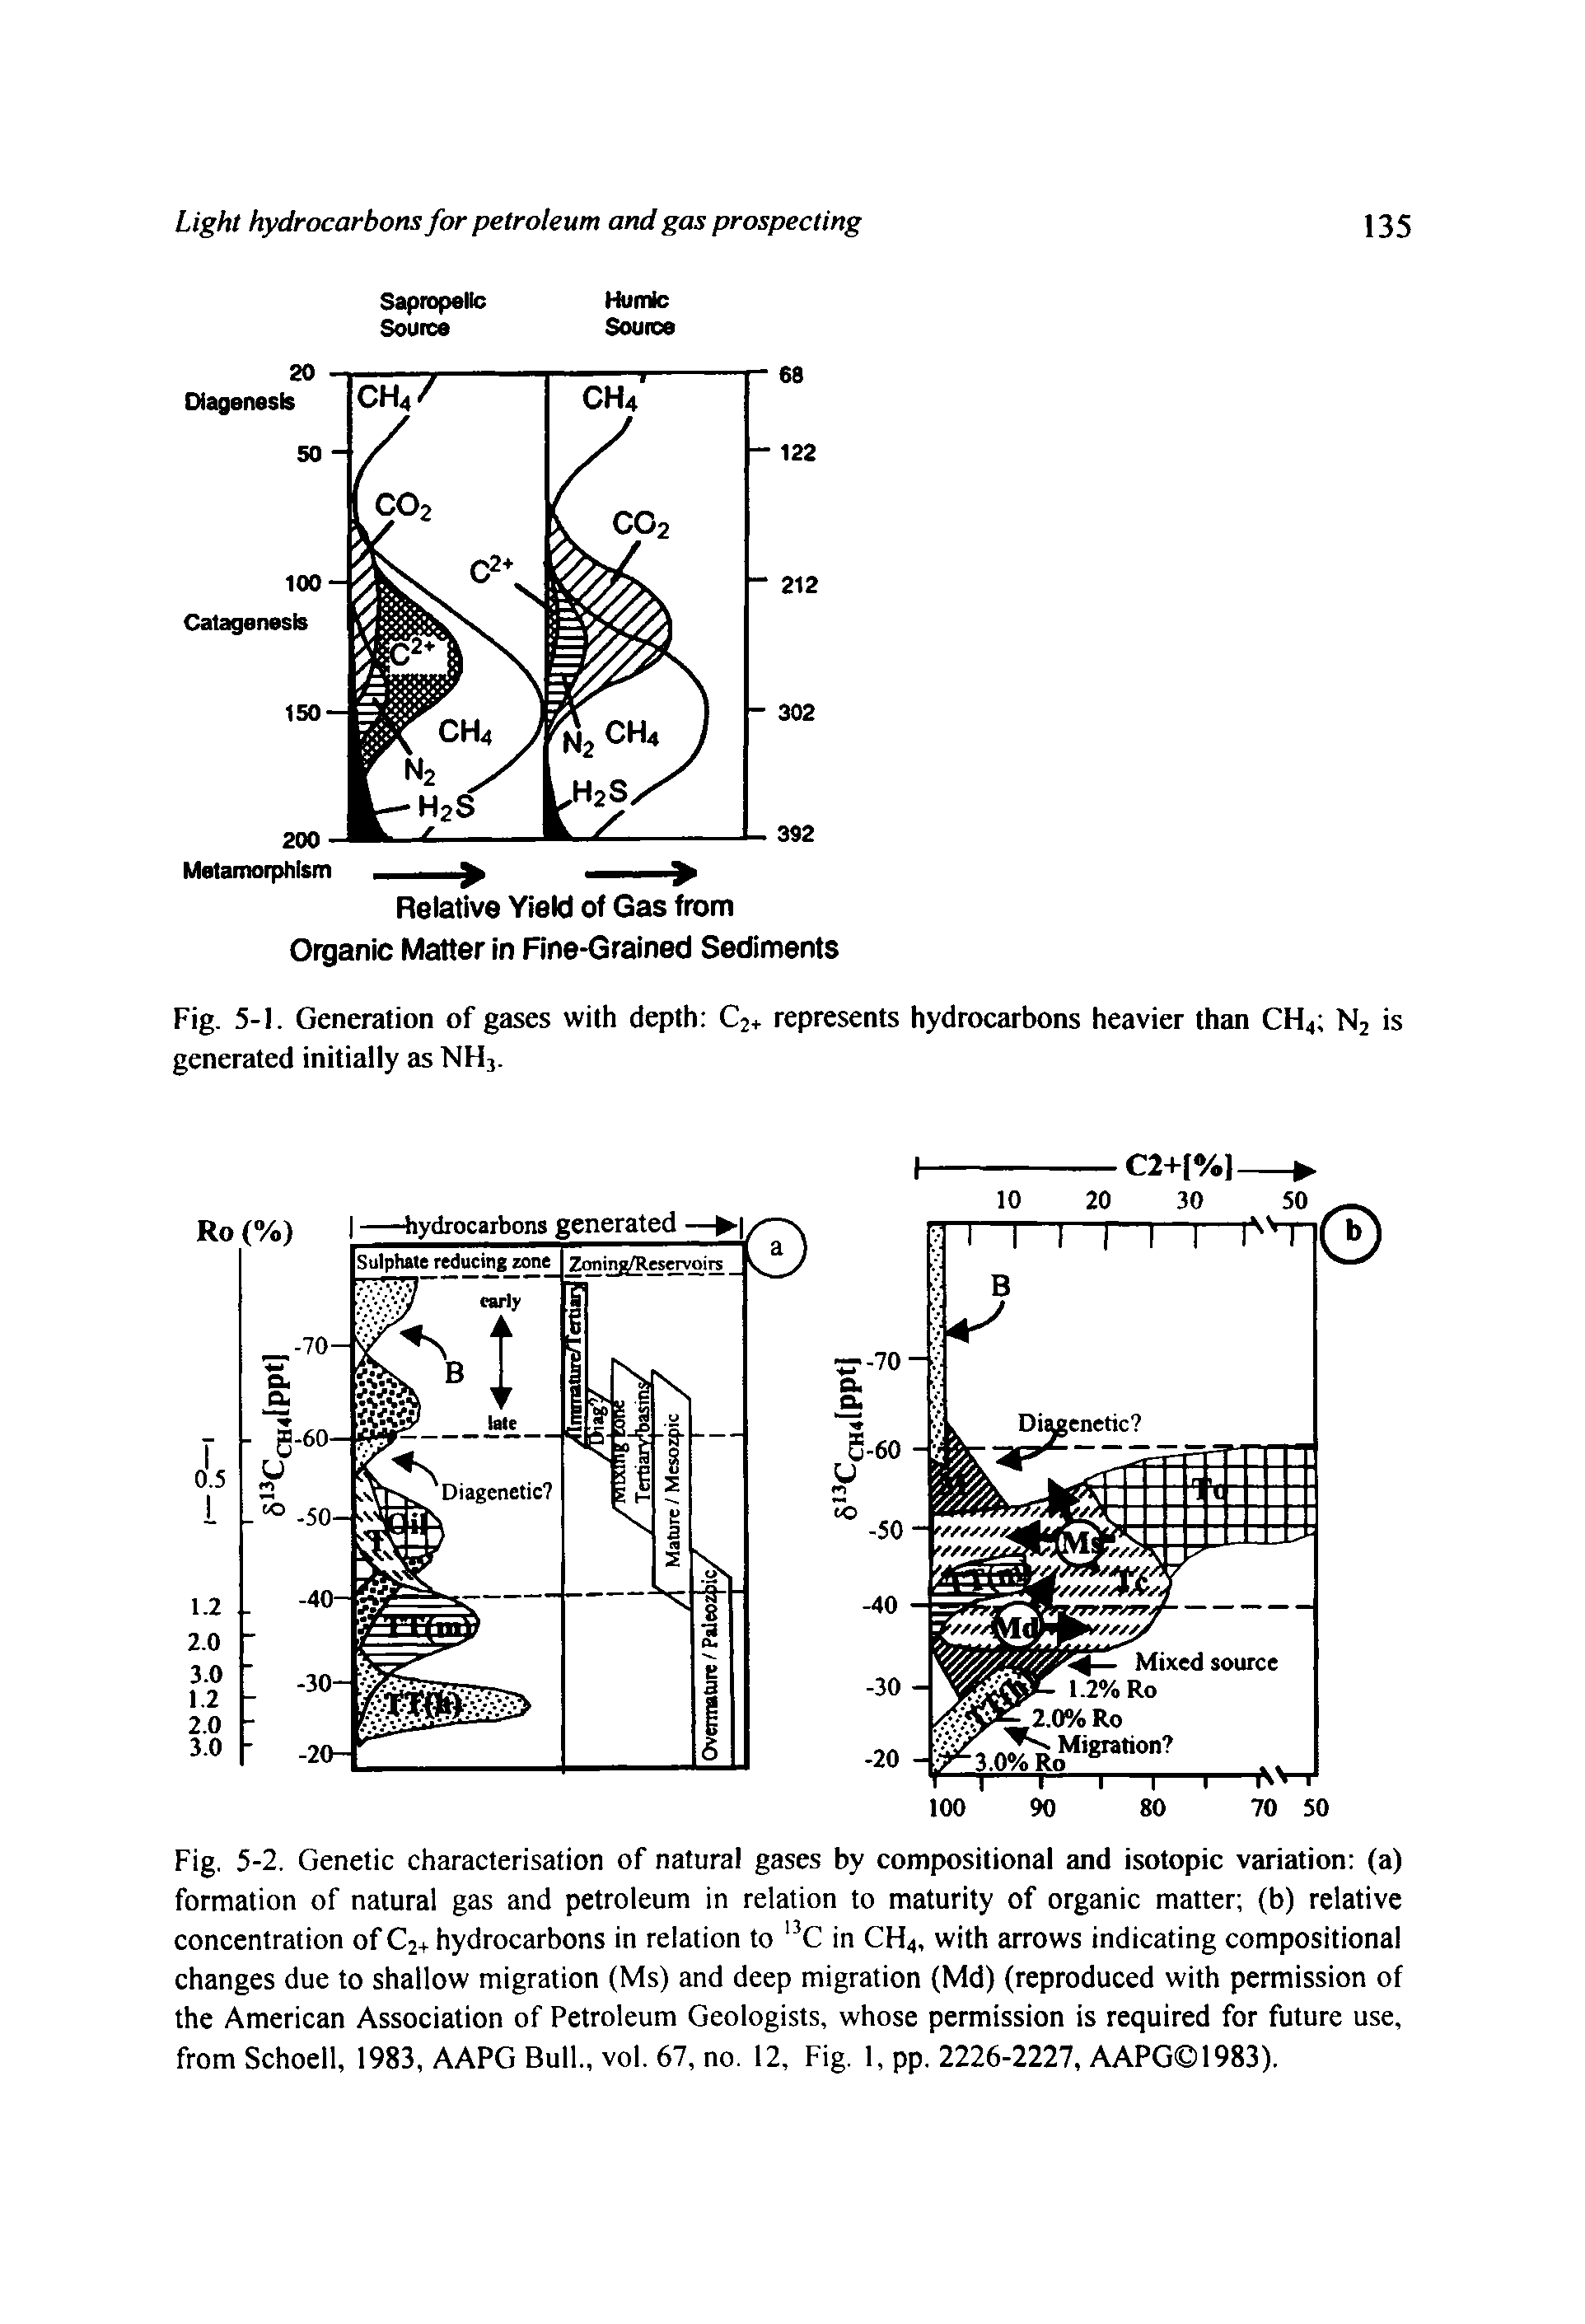 Fig. 5-2. Genetic characterisation of natural gases by compositional and isotopic variation (a) formation of natural gas and petroleum in relation to maturity of organic matter (b) relative concentration of C2+hydrocarbons in relation to C in CH4, with arrows indicating compositional changes due to shallow migration (Ms) and deep migration (Md) (reproduced with permission of the American Association of Petroleum Geologists, whose permission is required for future use, from Schoell, 1983, AAPG Bull., vol. 67, no. 12, Fig. 1, pp. 2226-2227, AAPG01983).